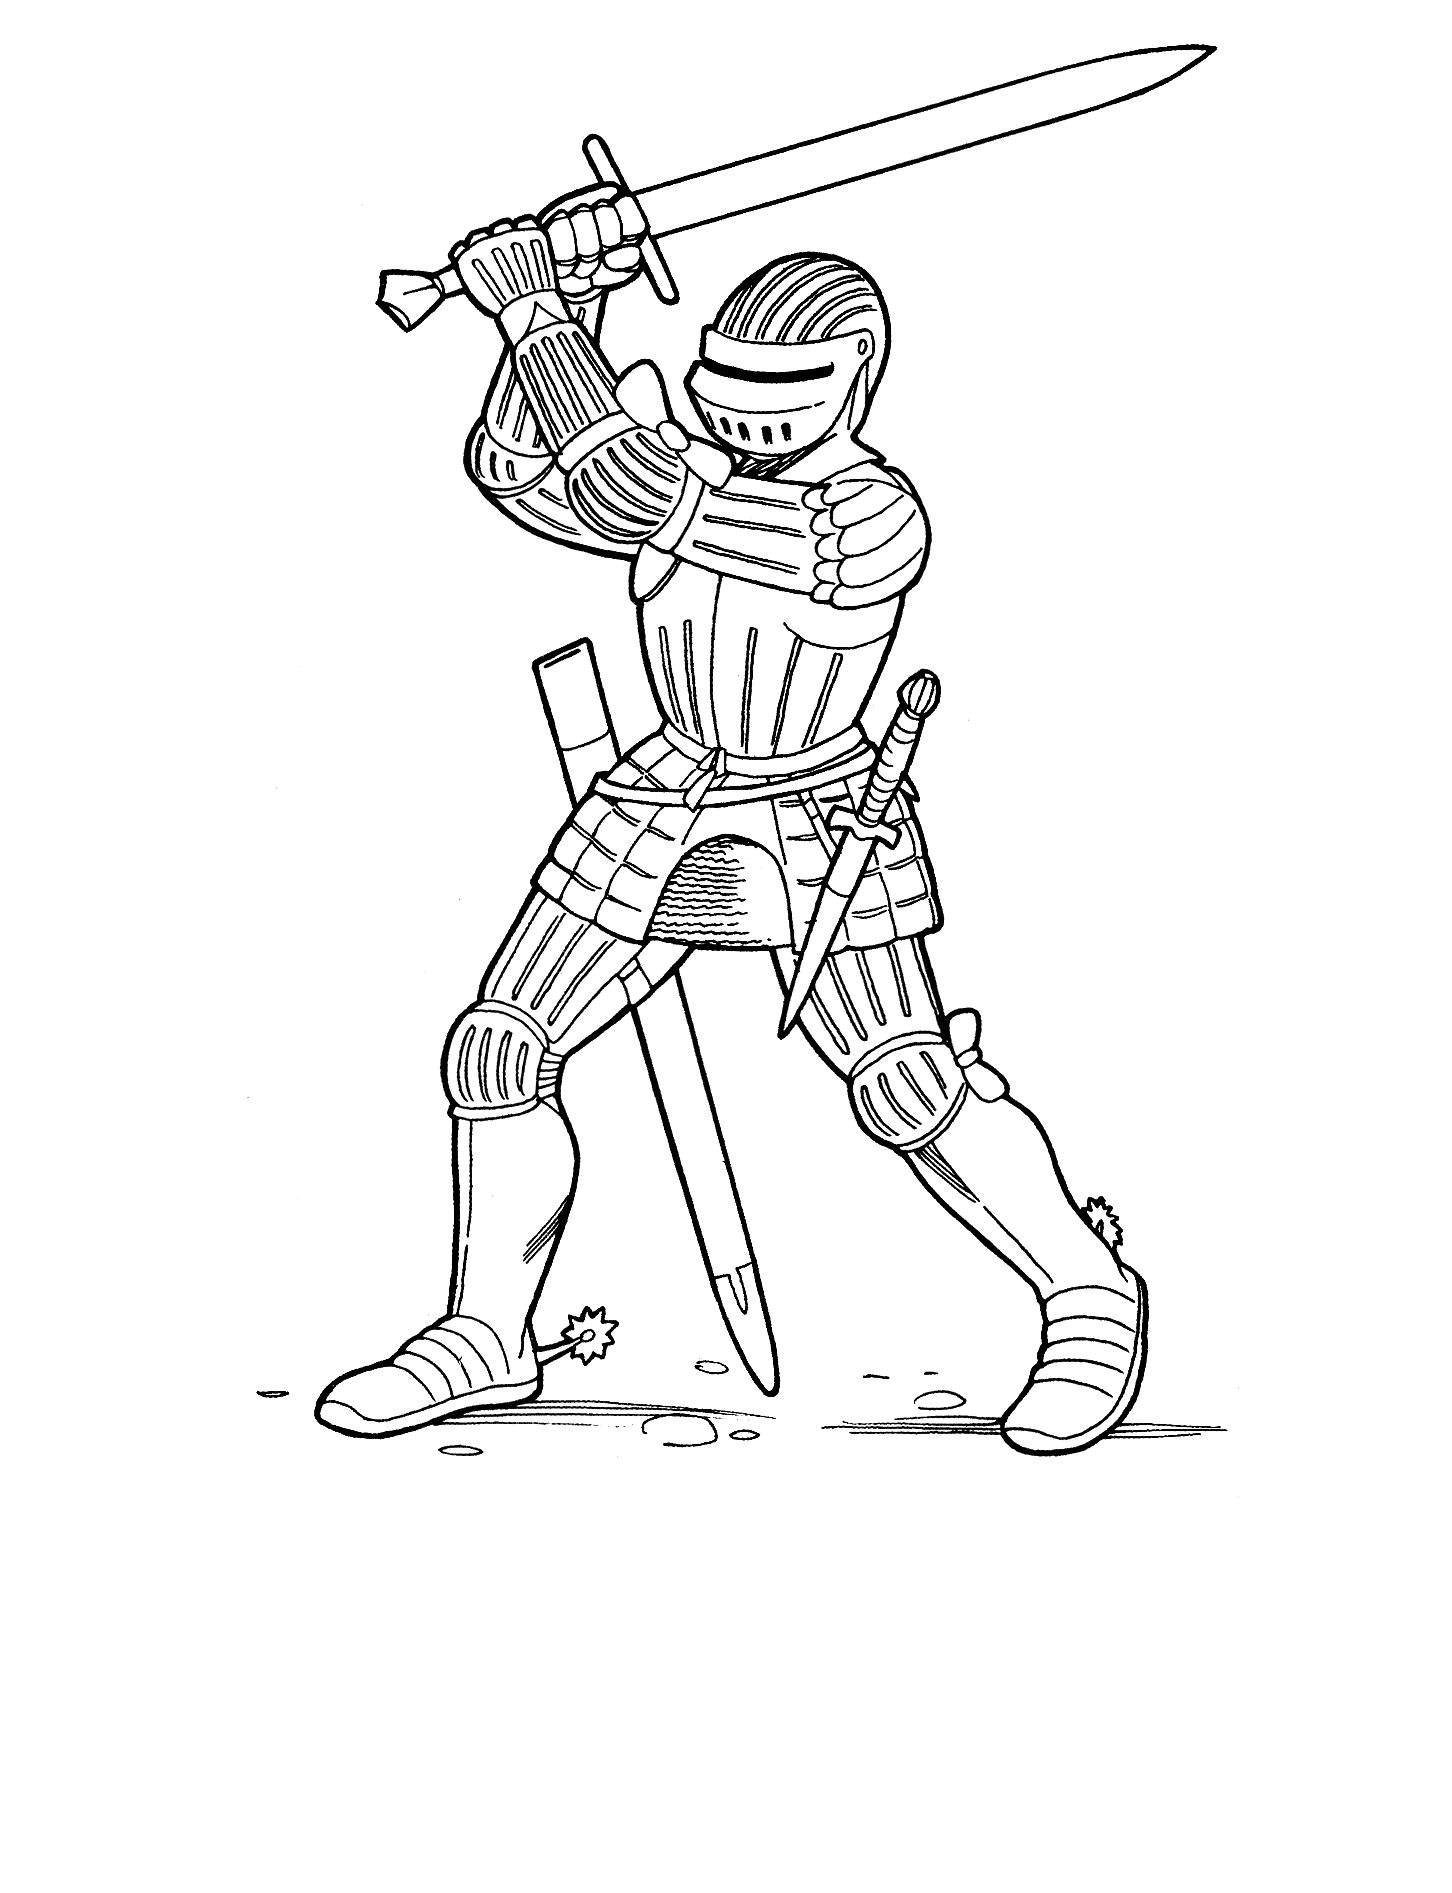 medieval knight coloring pages